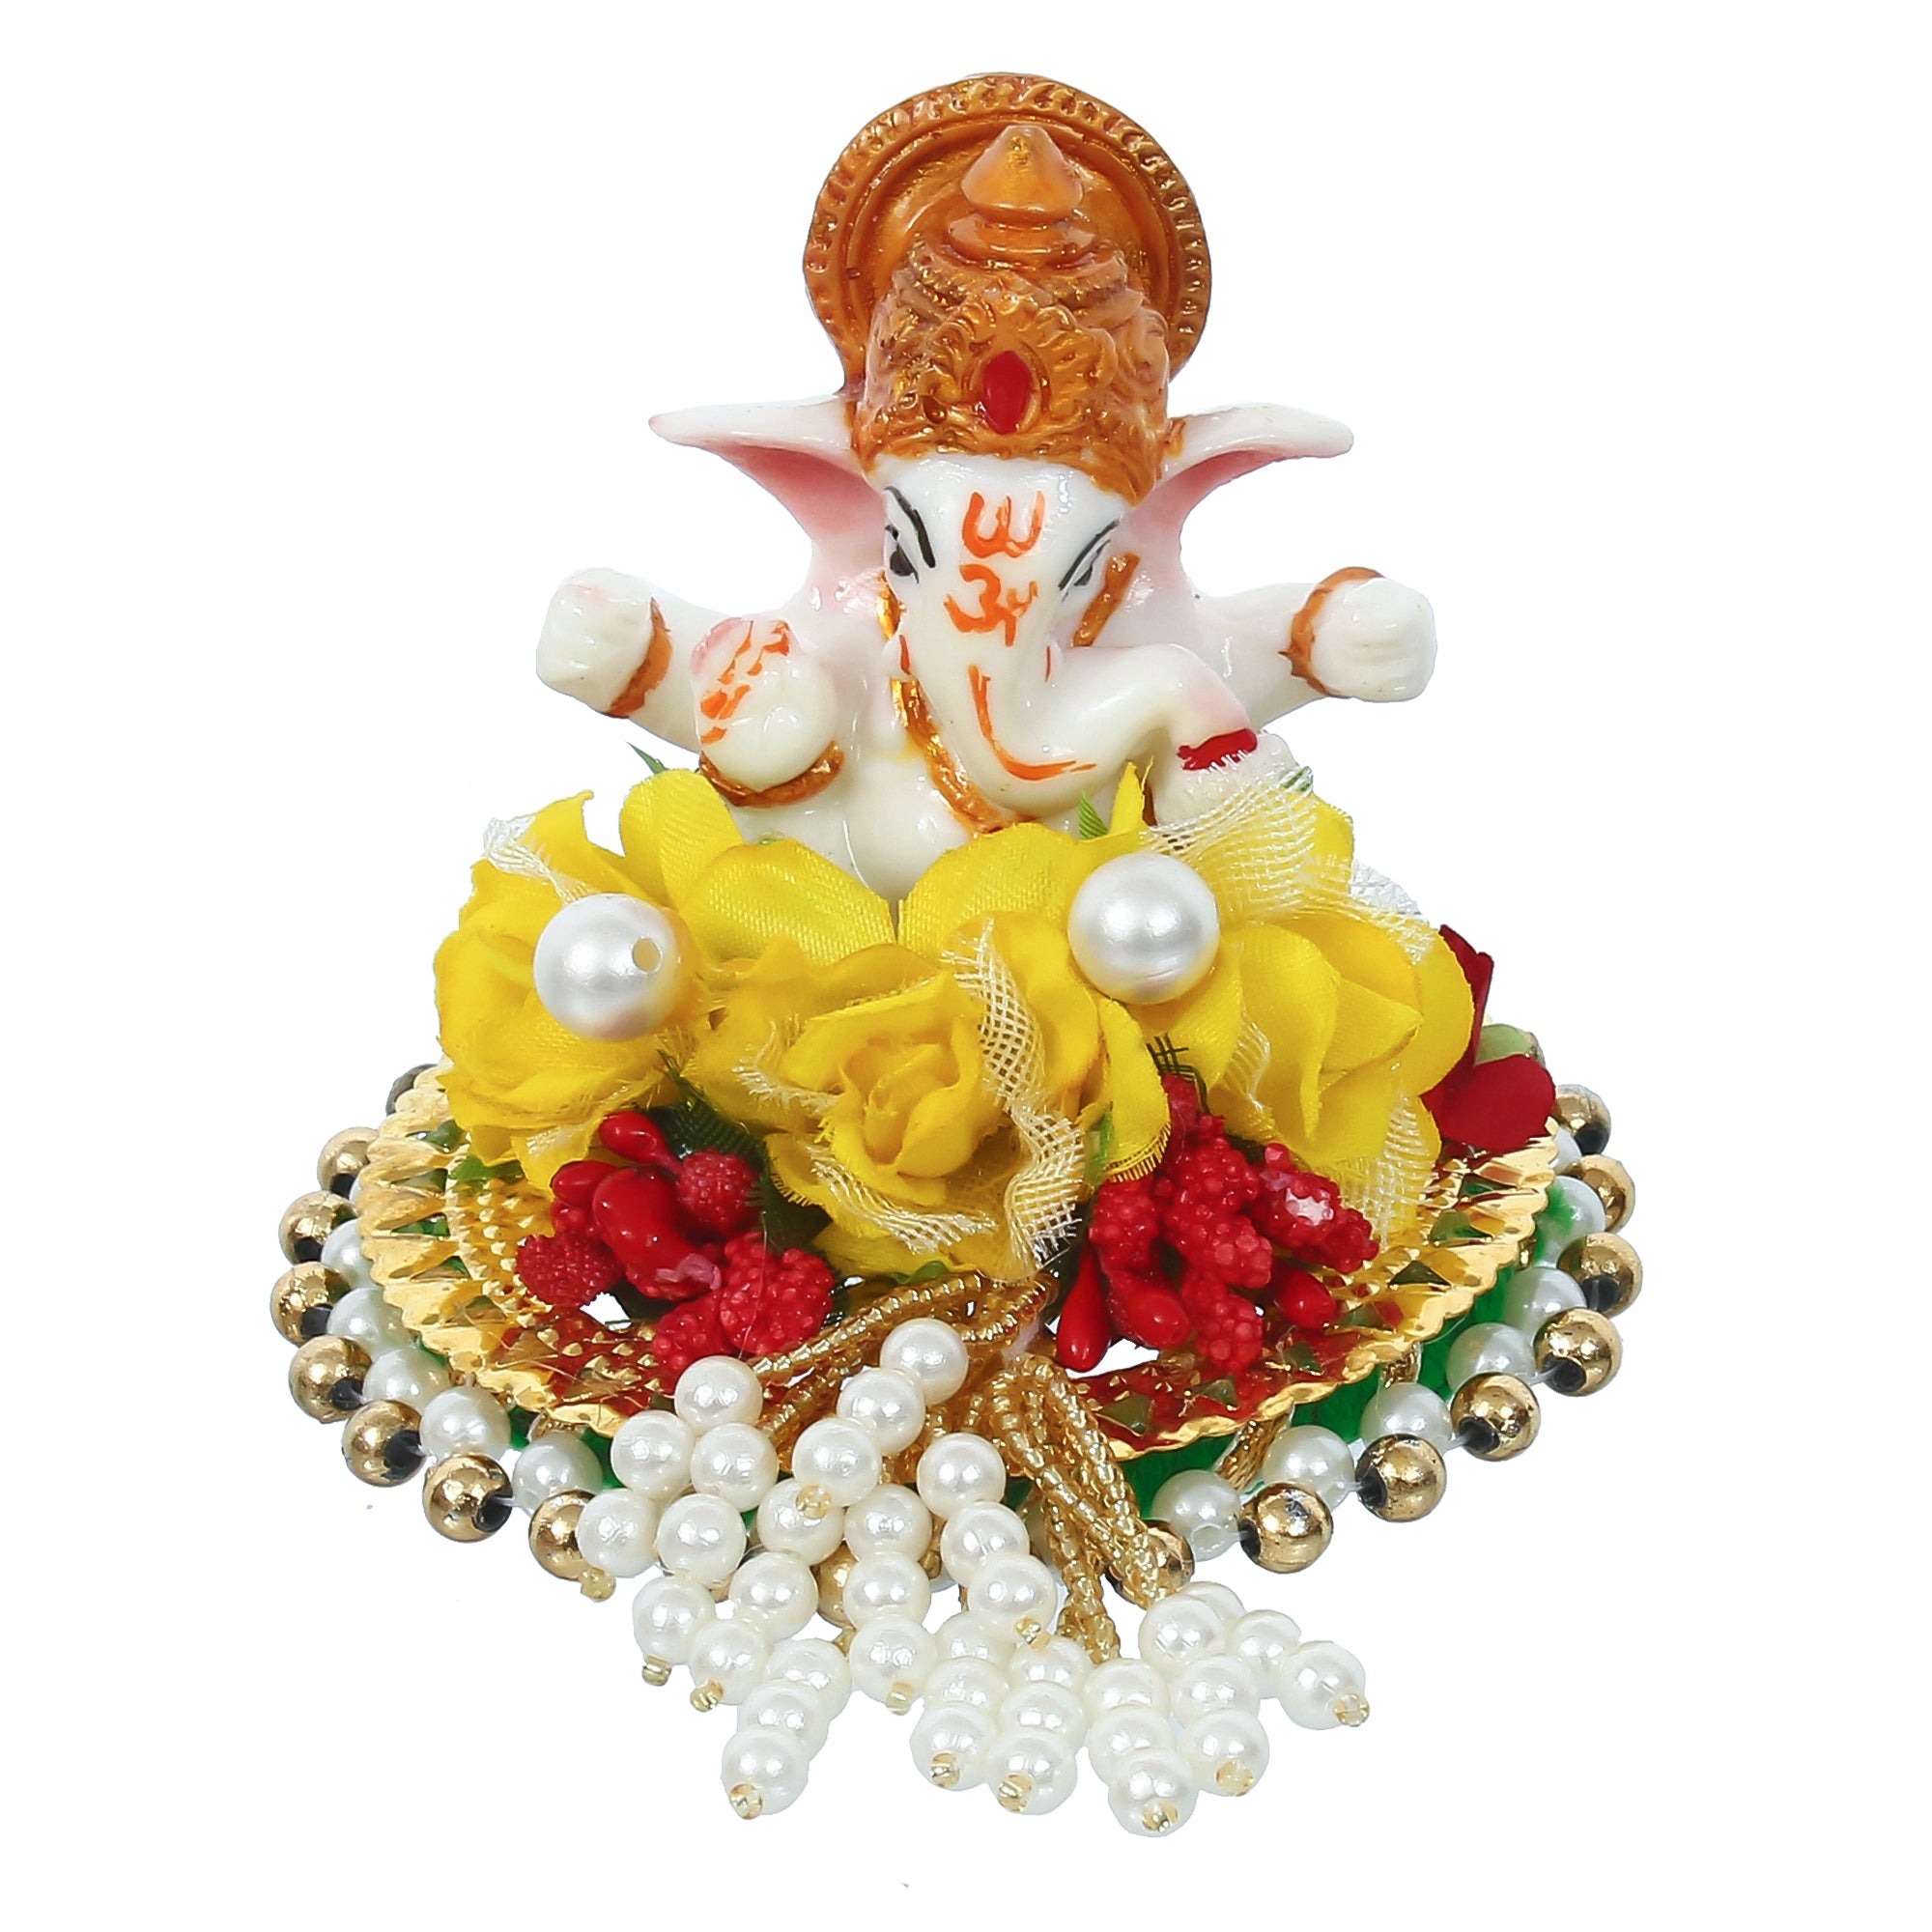 Lord Ganesha Idol on Decorative Handcrafted Plate with Colorful Flowers 4